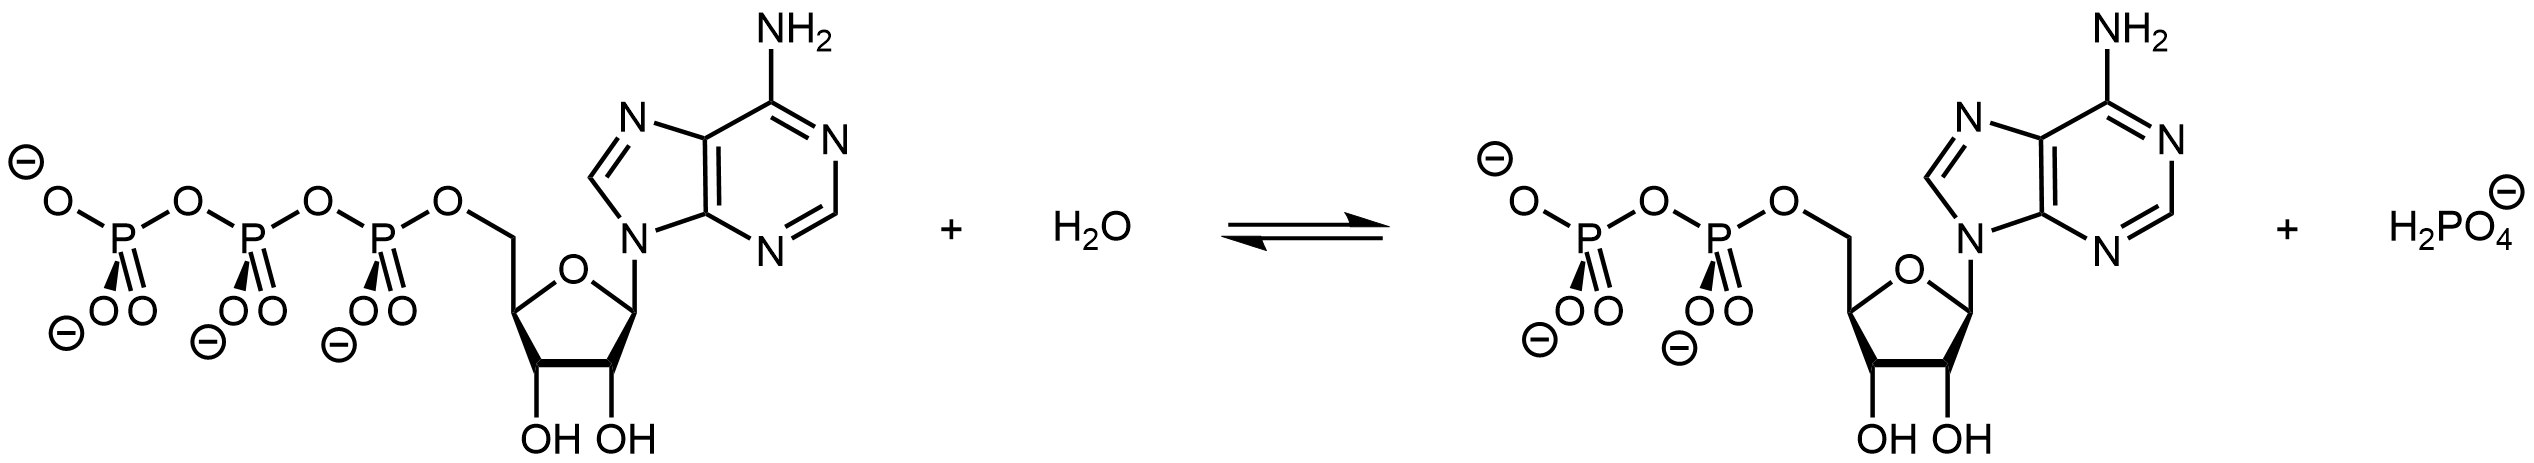 Reaction diagram of the hydrolysis of ATP forming ATP and H2PO4-.